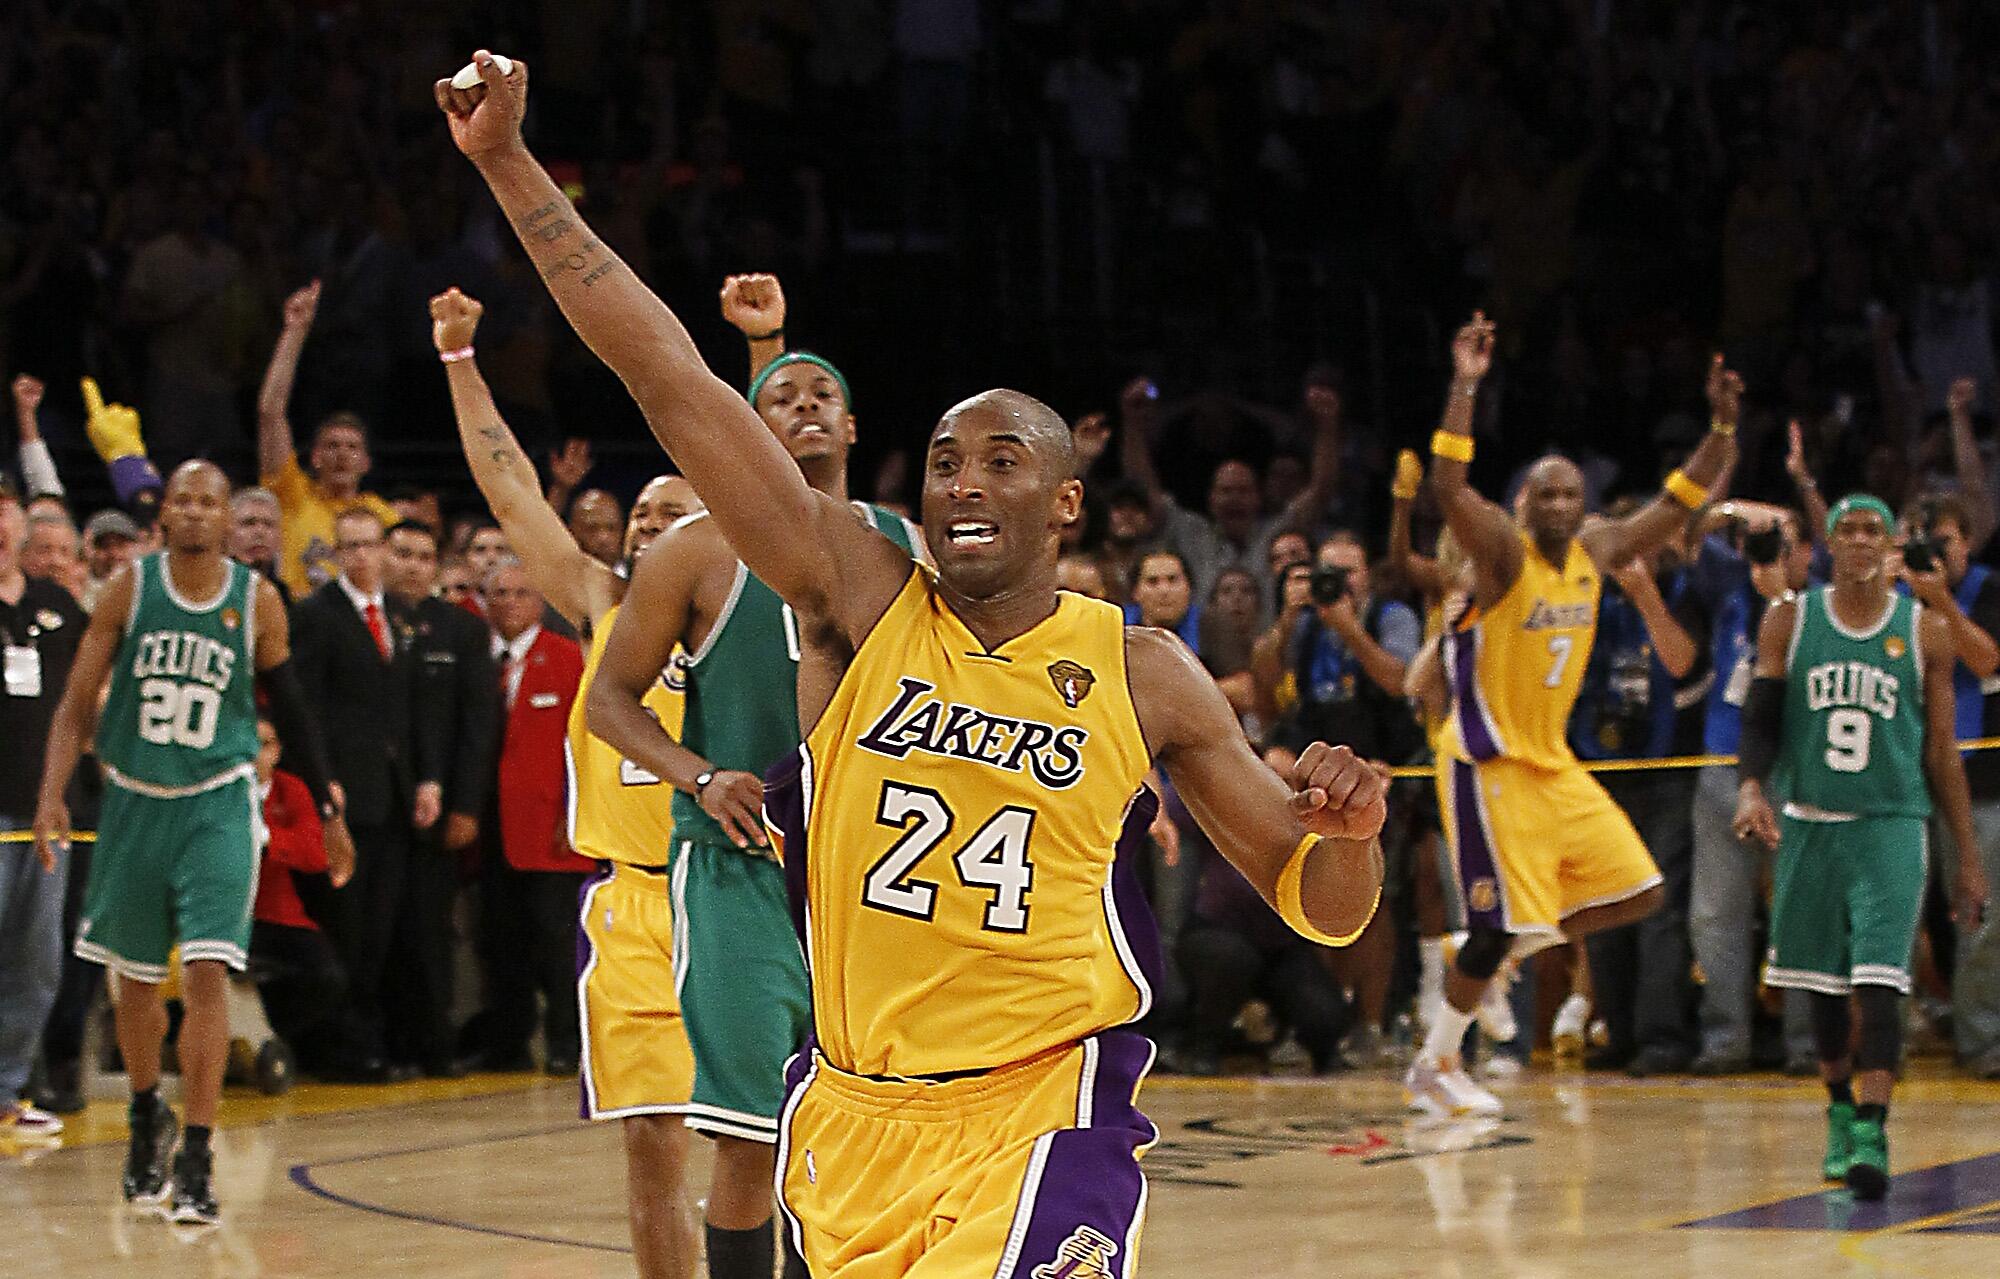 Kobe Bryant smiles and poses with a basketball wearing Laker home color  shoes and jersey at